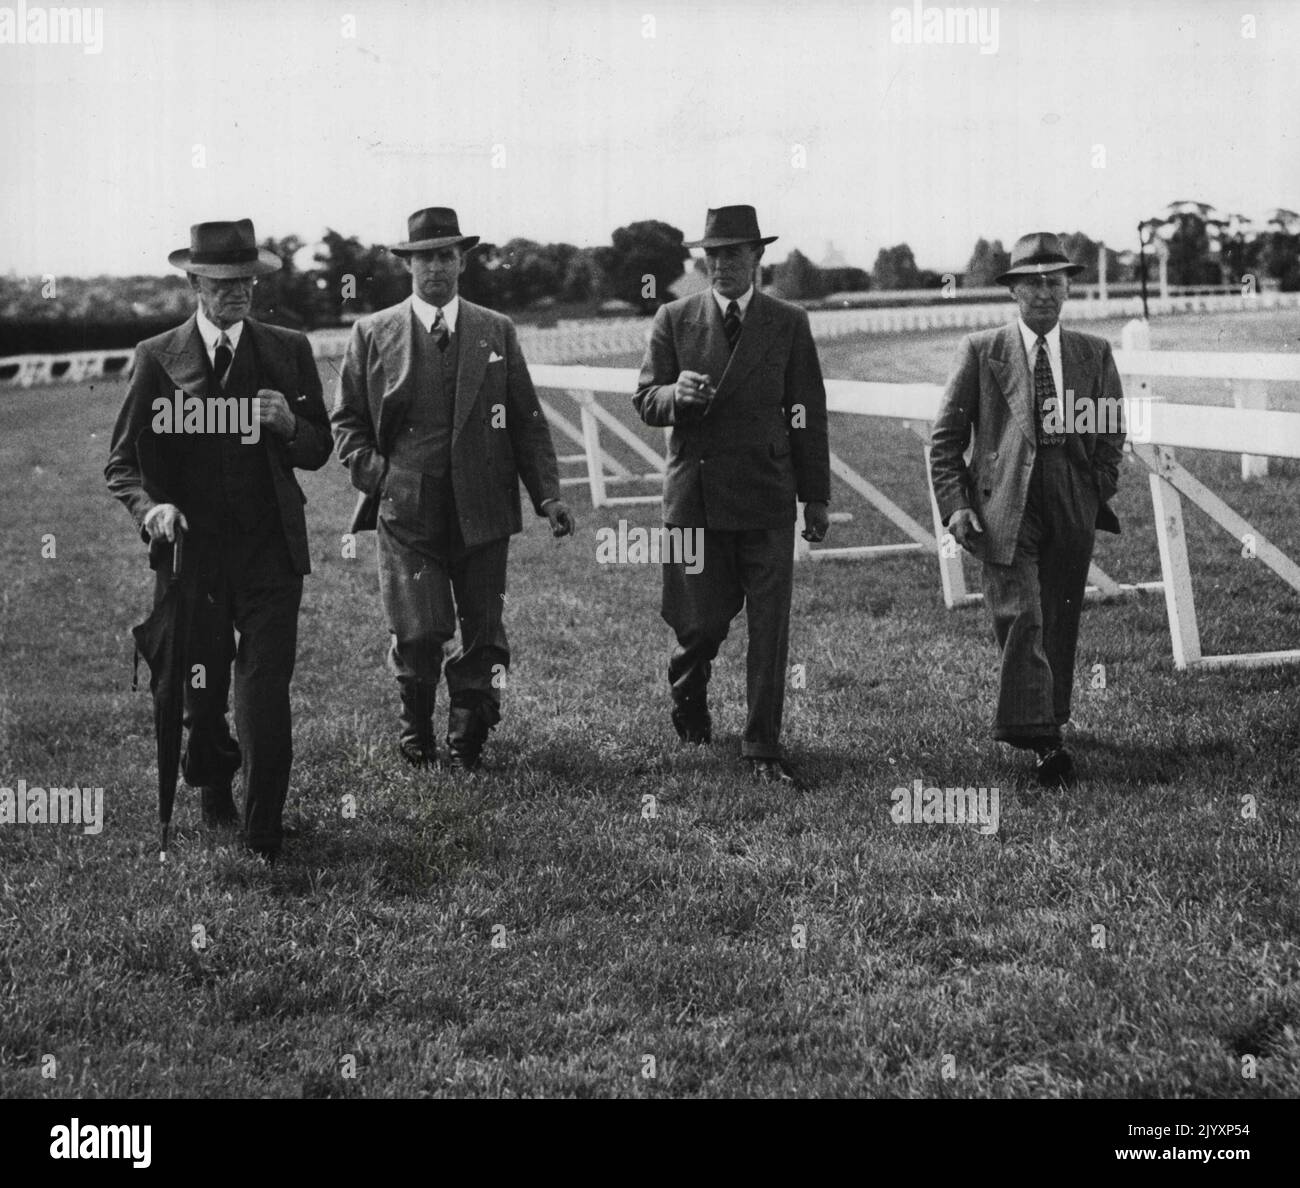 Race Track Inspection -- The track at Flemington racecourse being inspected today after yesterday's heavy downpour. Above (from left): Mr. D. W. Reid (stipendiary steward), the secretary of the Melbourne Racing Club (Mr. John C. Reilly), Mr. N. W. Faulkiner (stipendiary steward), and the racecourse supervisor (Mr. W. Mitchell). November 16, 1949. Stock Photo